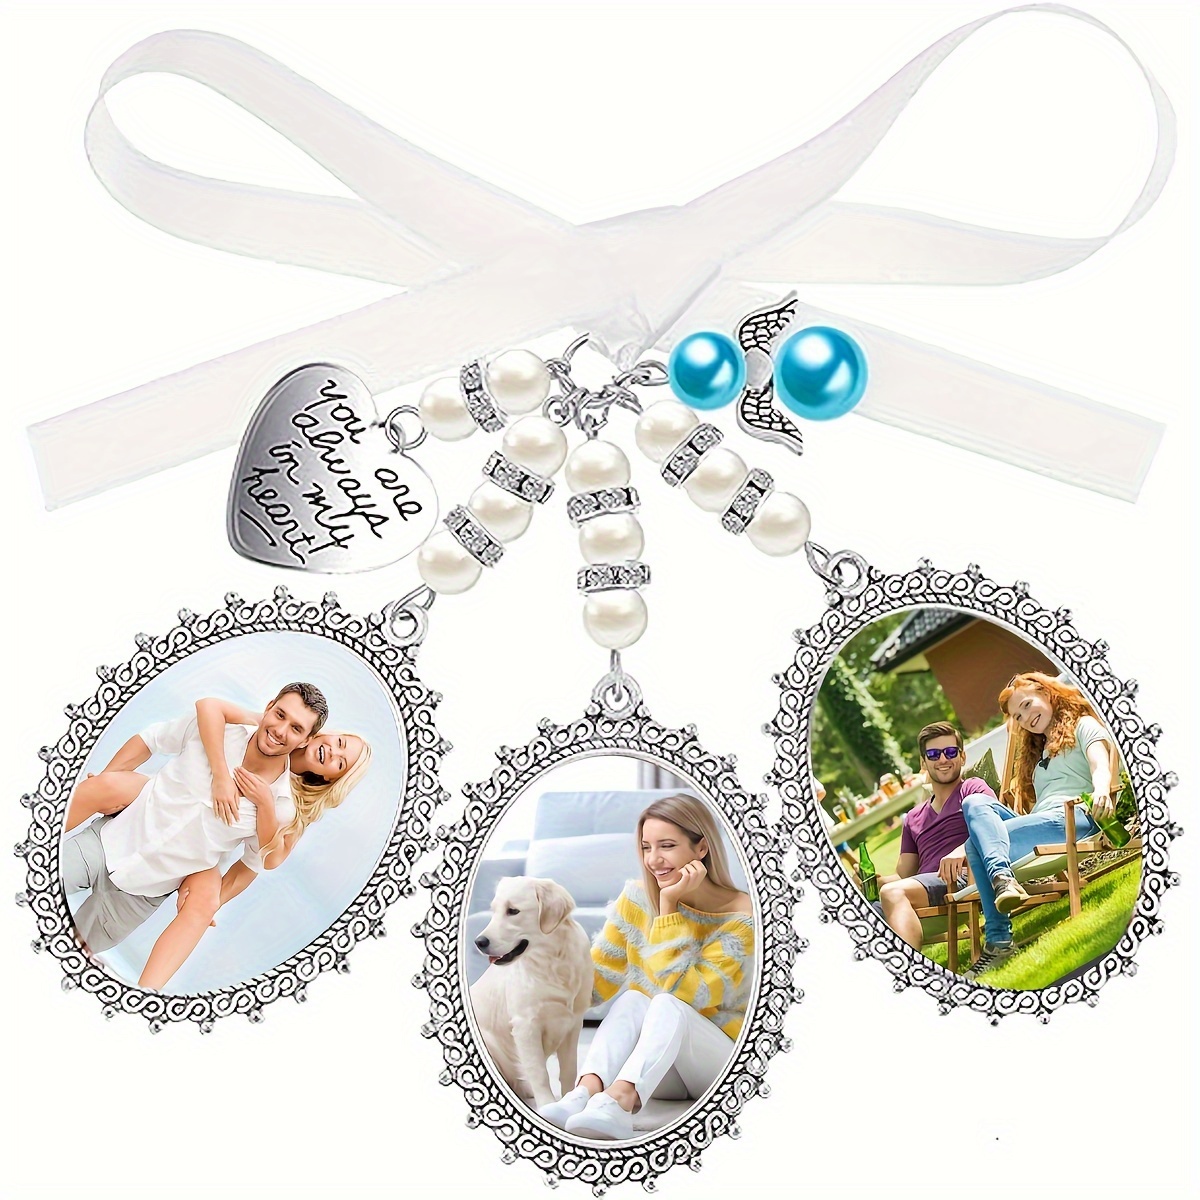 

Set, Wedding Bouquet Photo Charms Wedding Memory Bridal Lace Oval Bridal Pearl Charms You Are Always In My Heart Charms For Bride Party, Wedding, Engagement Decor